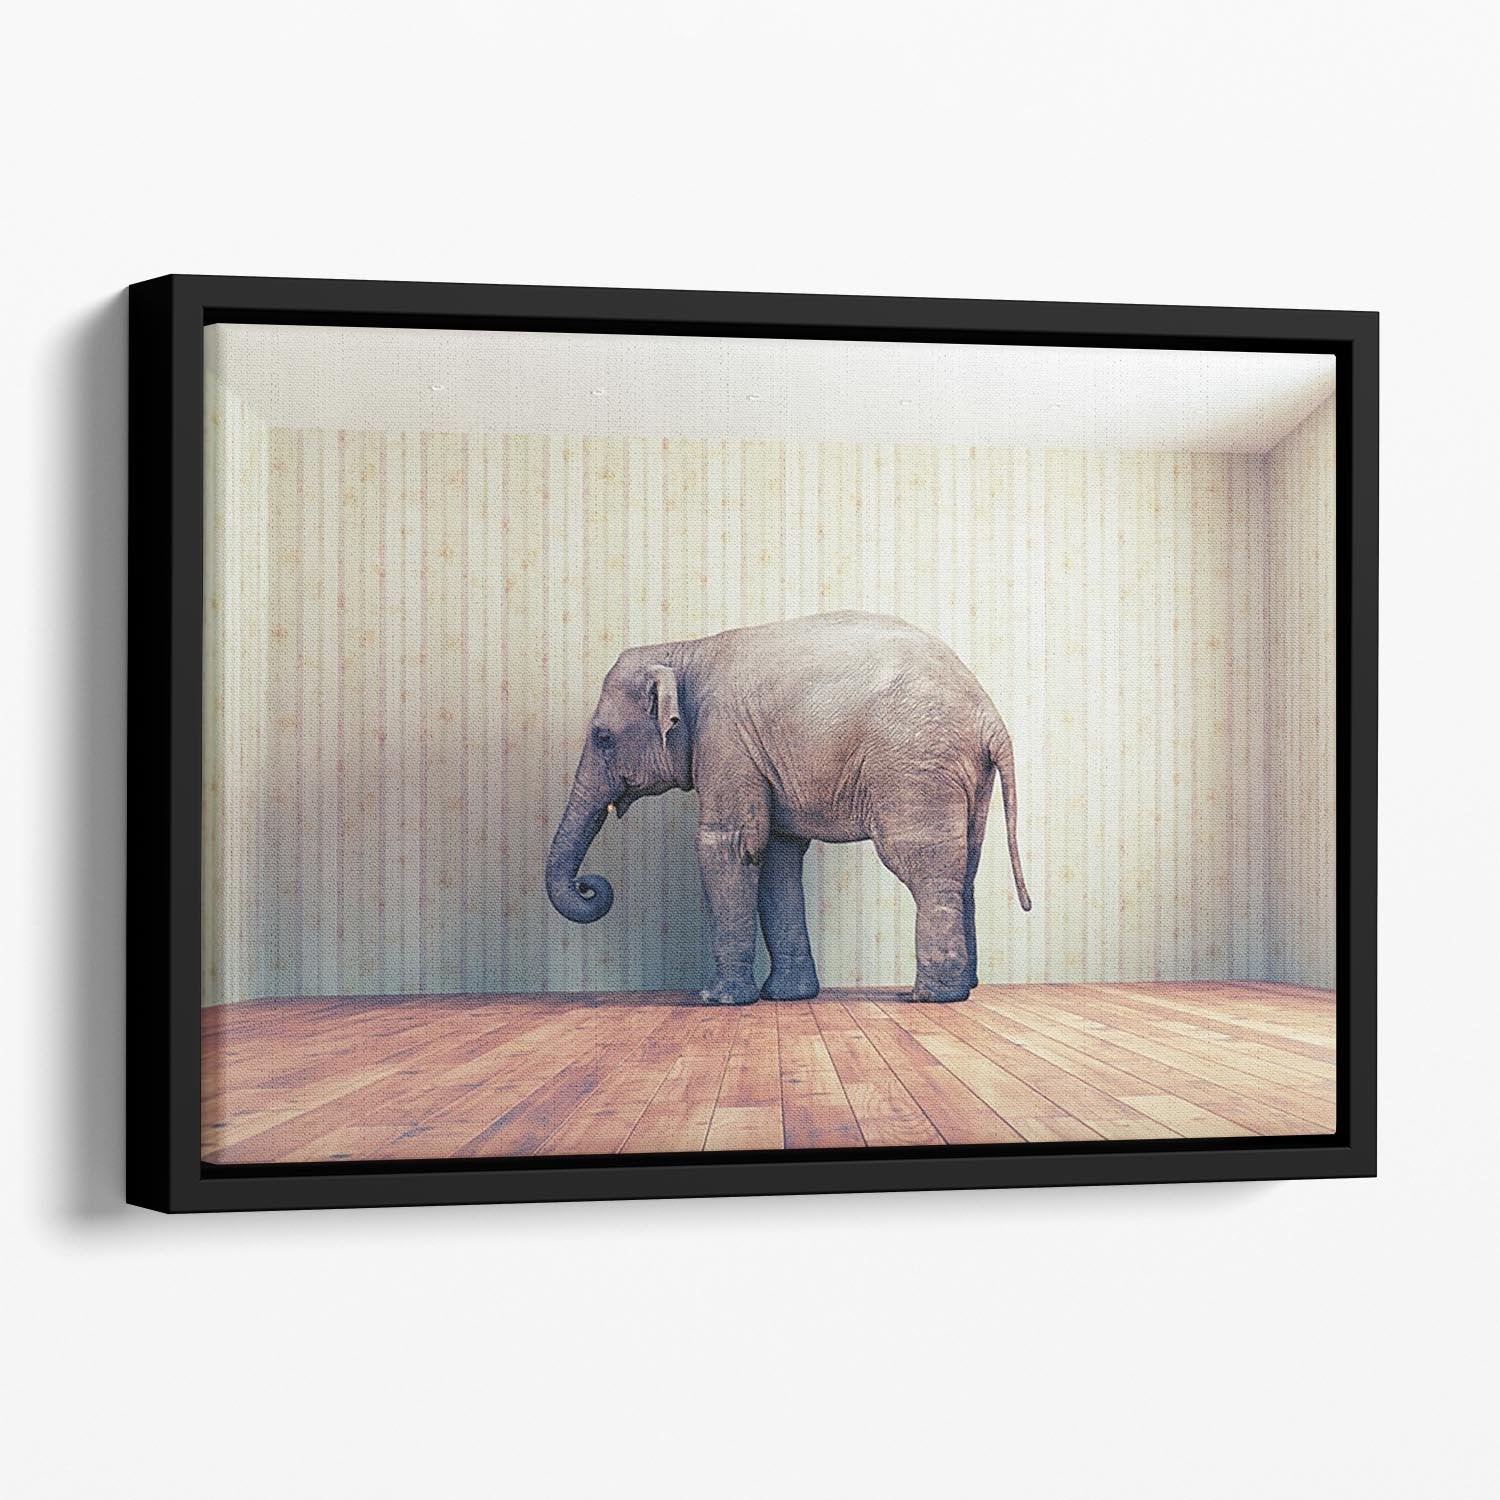 Lone elephant in the room Floating Framed Canvas - Canvas Art Rocks - 1